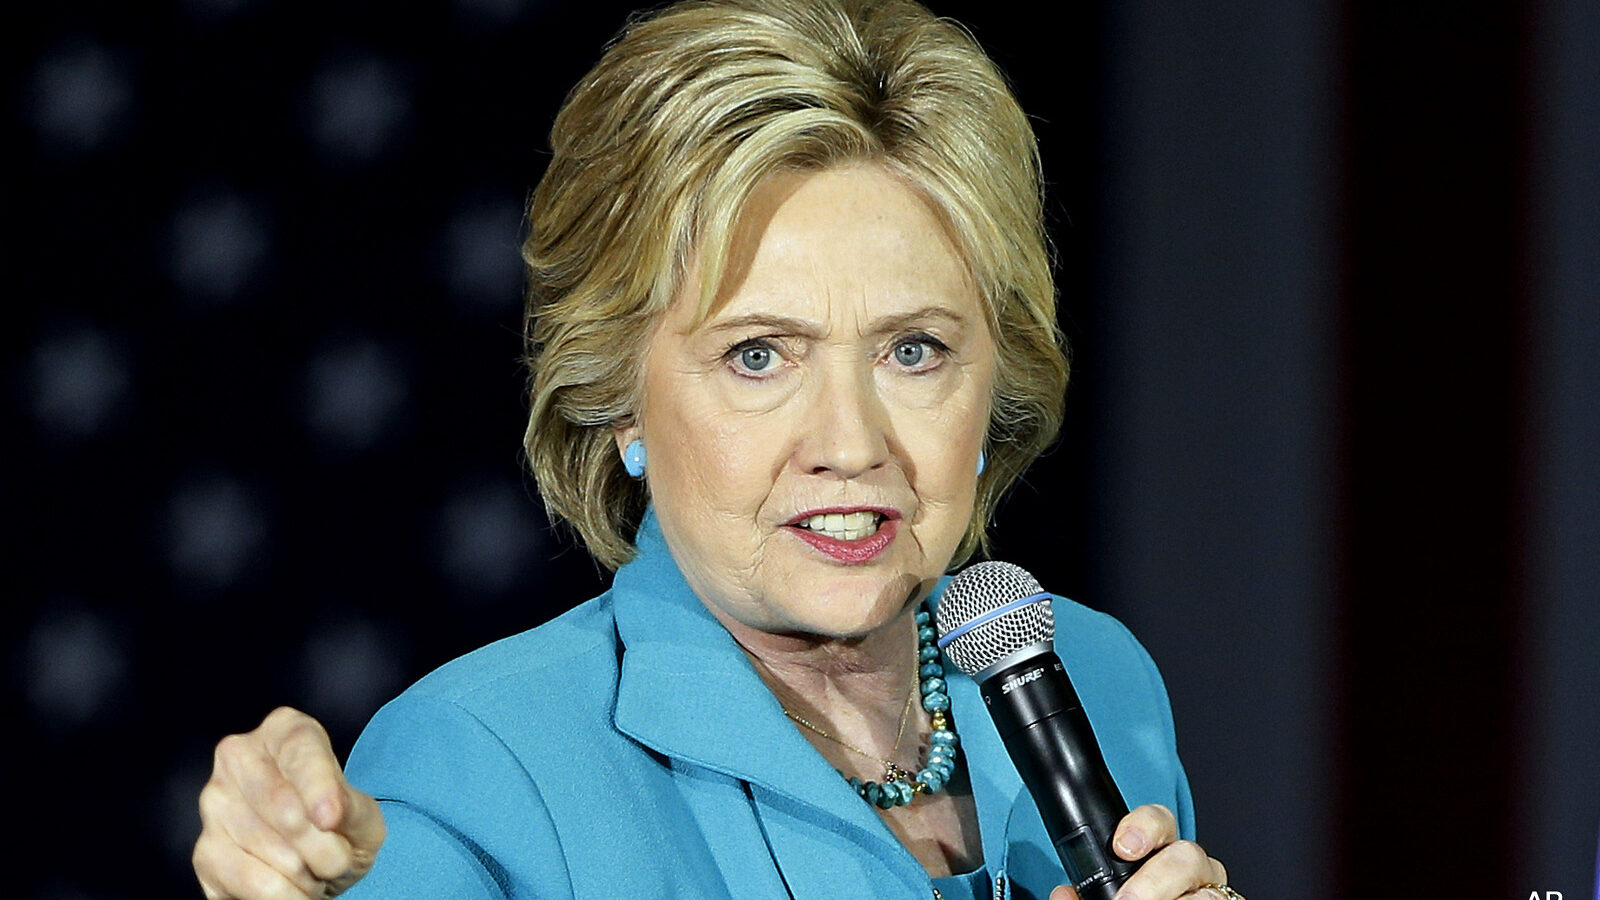 2016 file photo, Democratic presidential candidate Hillary Clinton speaks in Commerce, Calif. A State Department audit has faulted Hillary Clinton and previous top U.S. diplomats for poorly managing information and slowly responding to new cybersecurity risks. (AP Photo/John Locher, File)